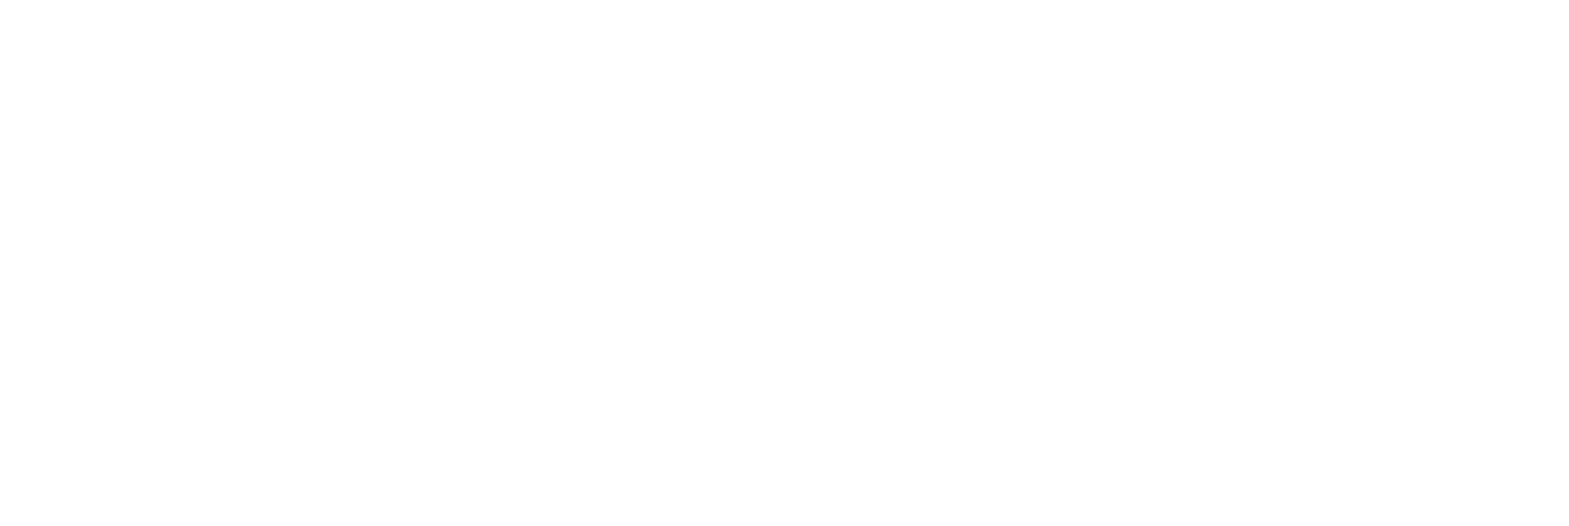 First Busey logo large for dark backgrounds (transparent PNG)